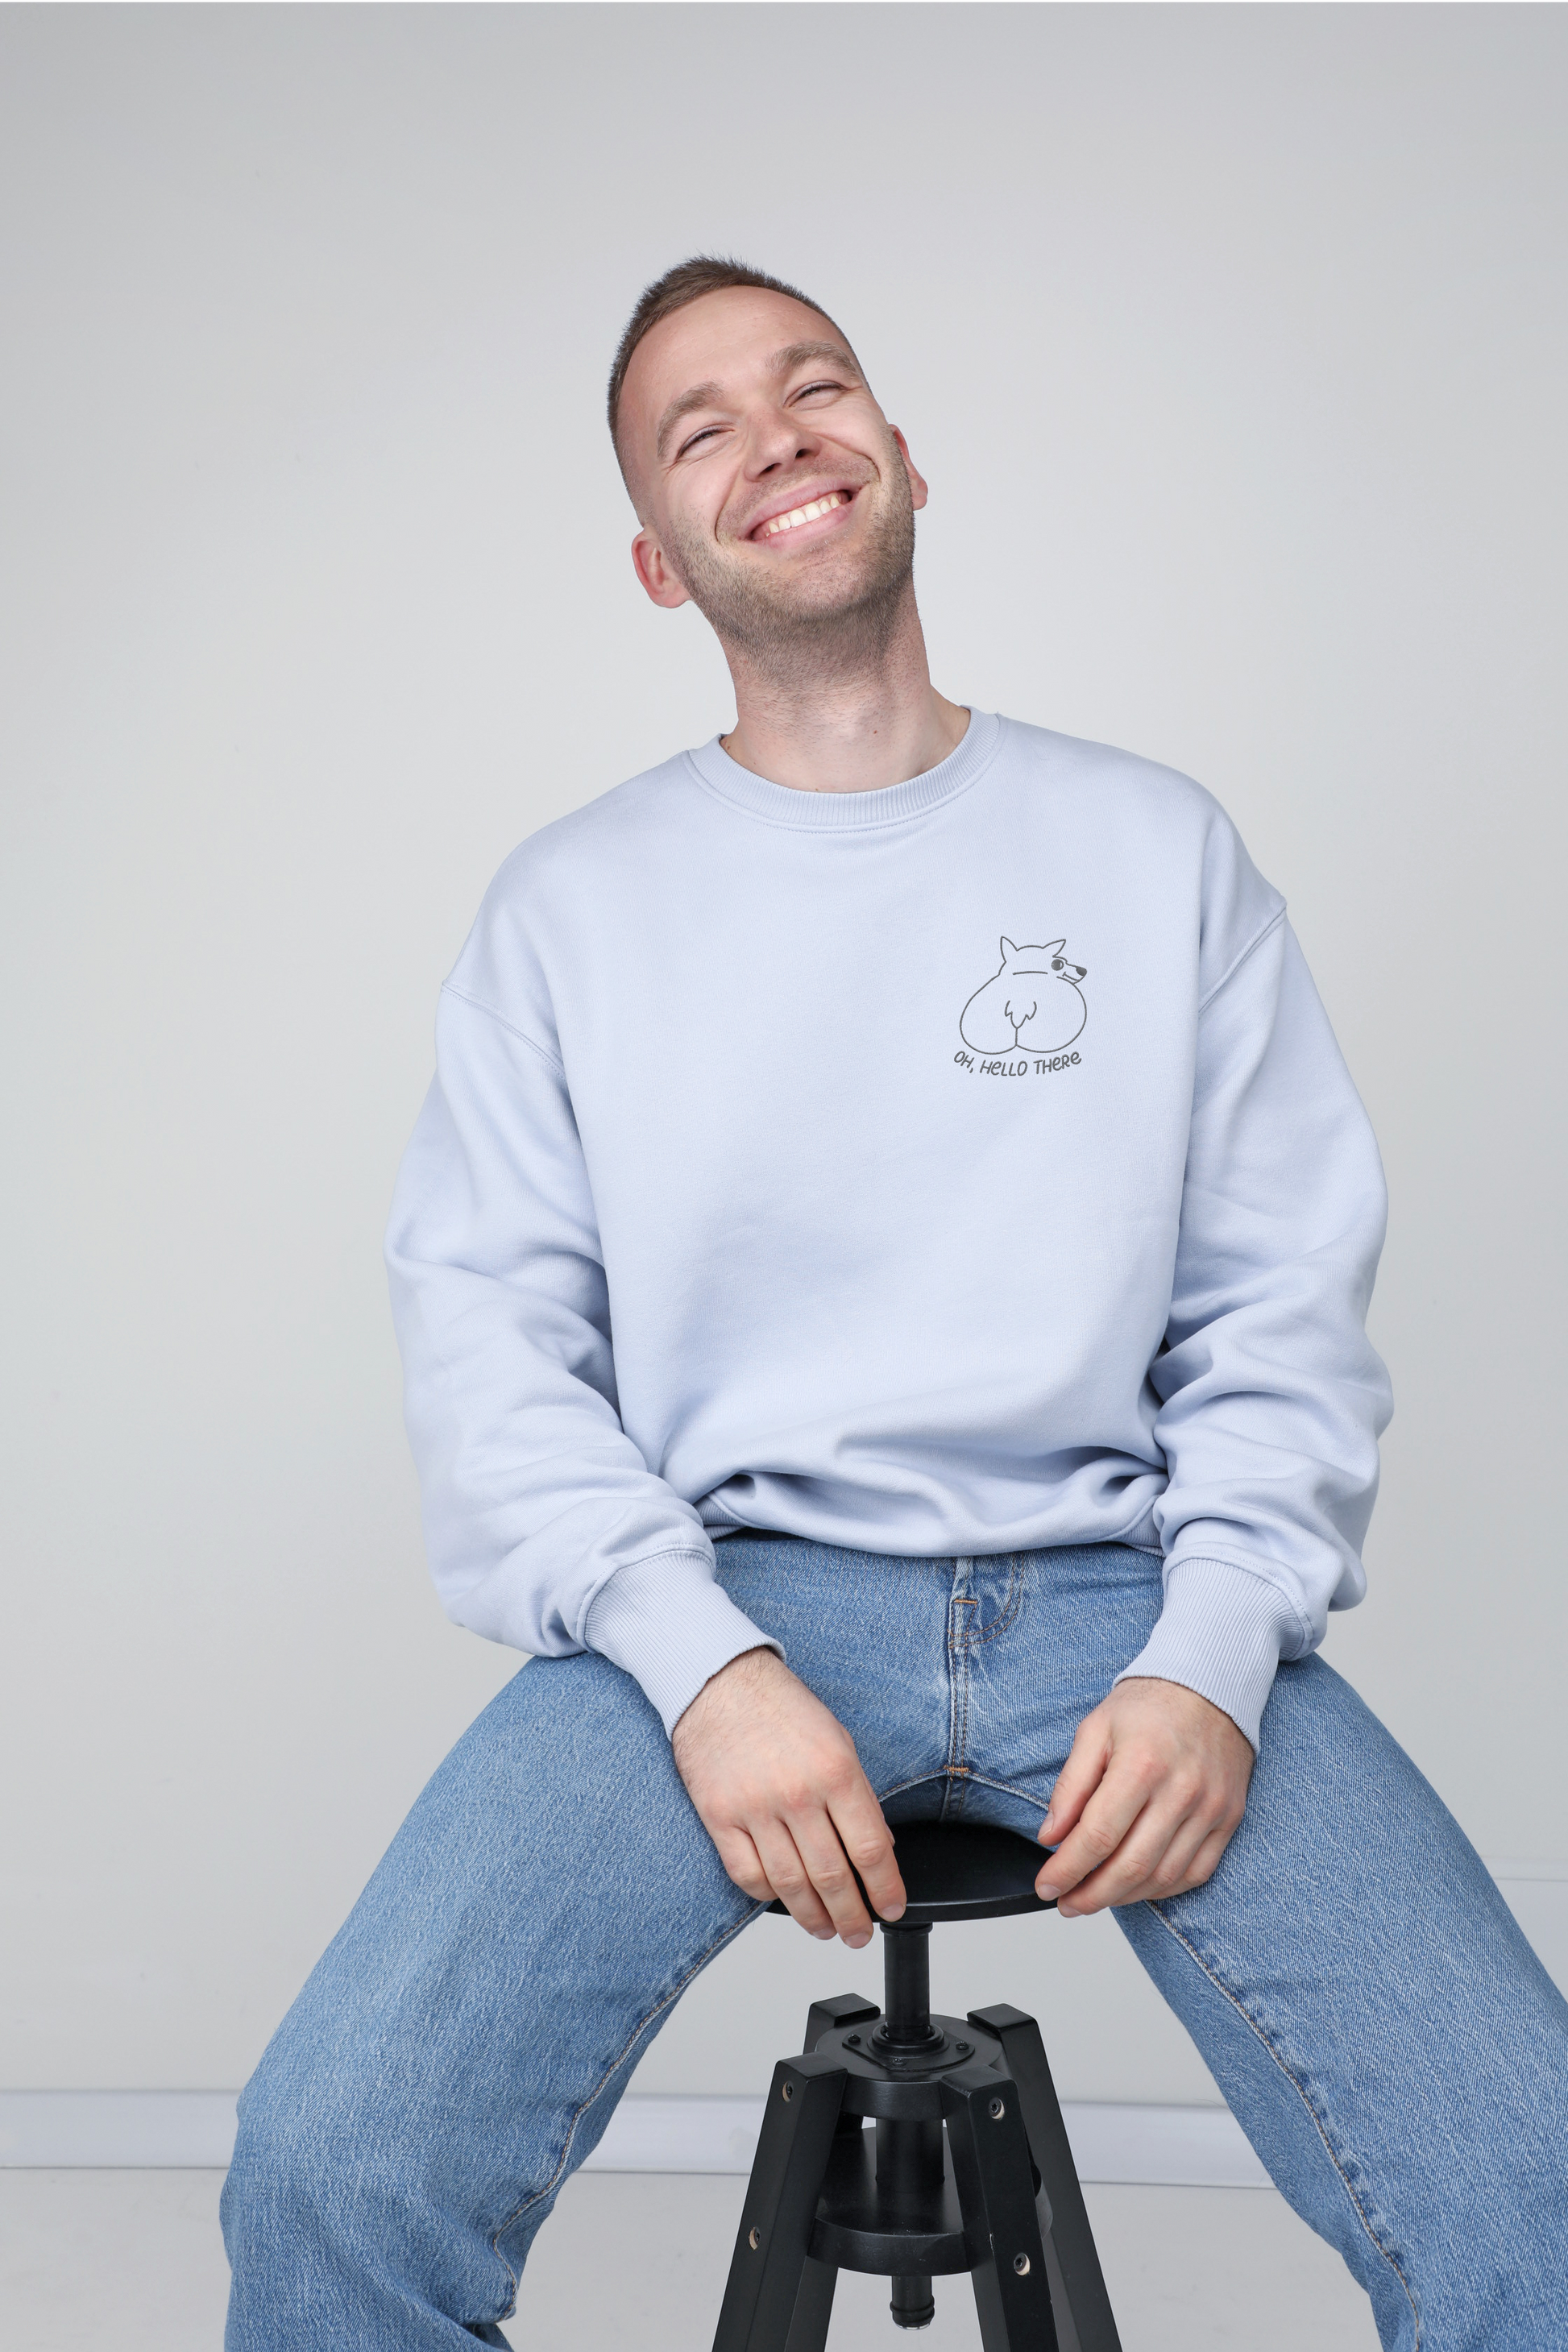 Oh, hello there! | Crew neck sweatshirt with embroidered dog. Oversize fit | Unisex by My Wild Other